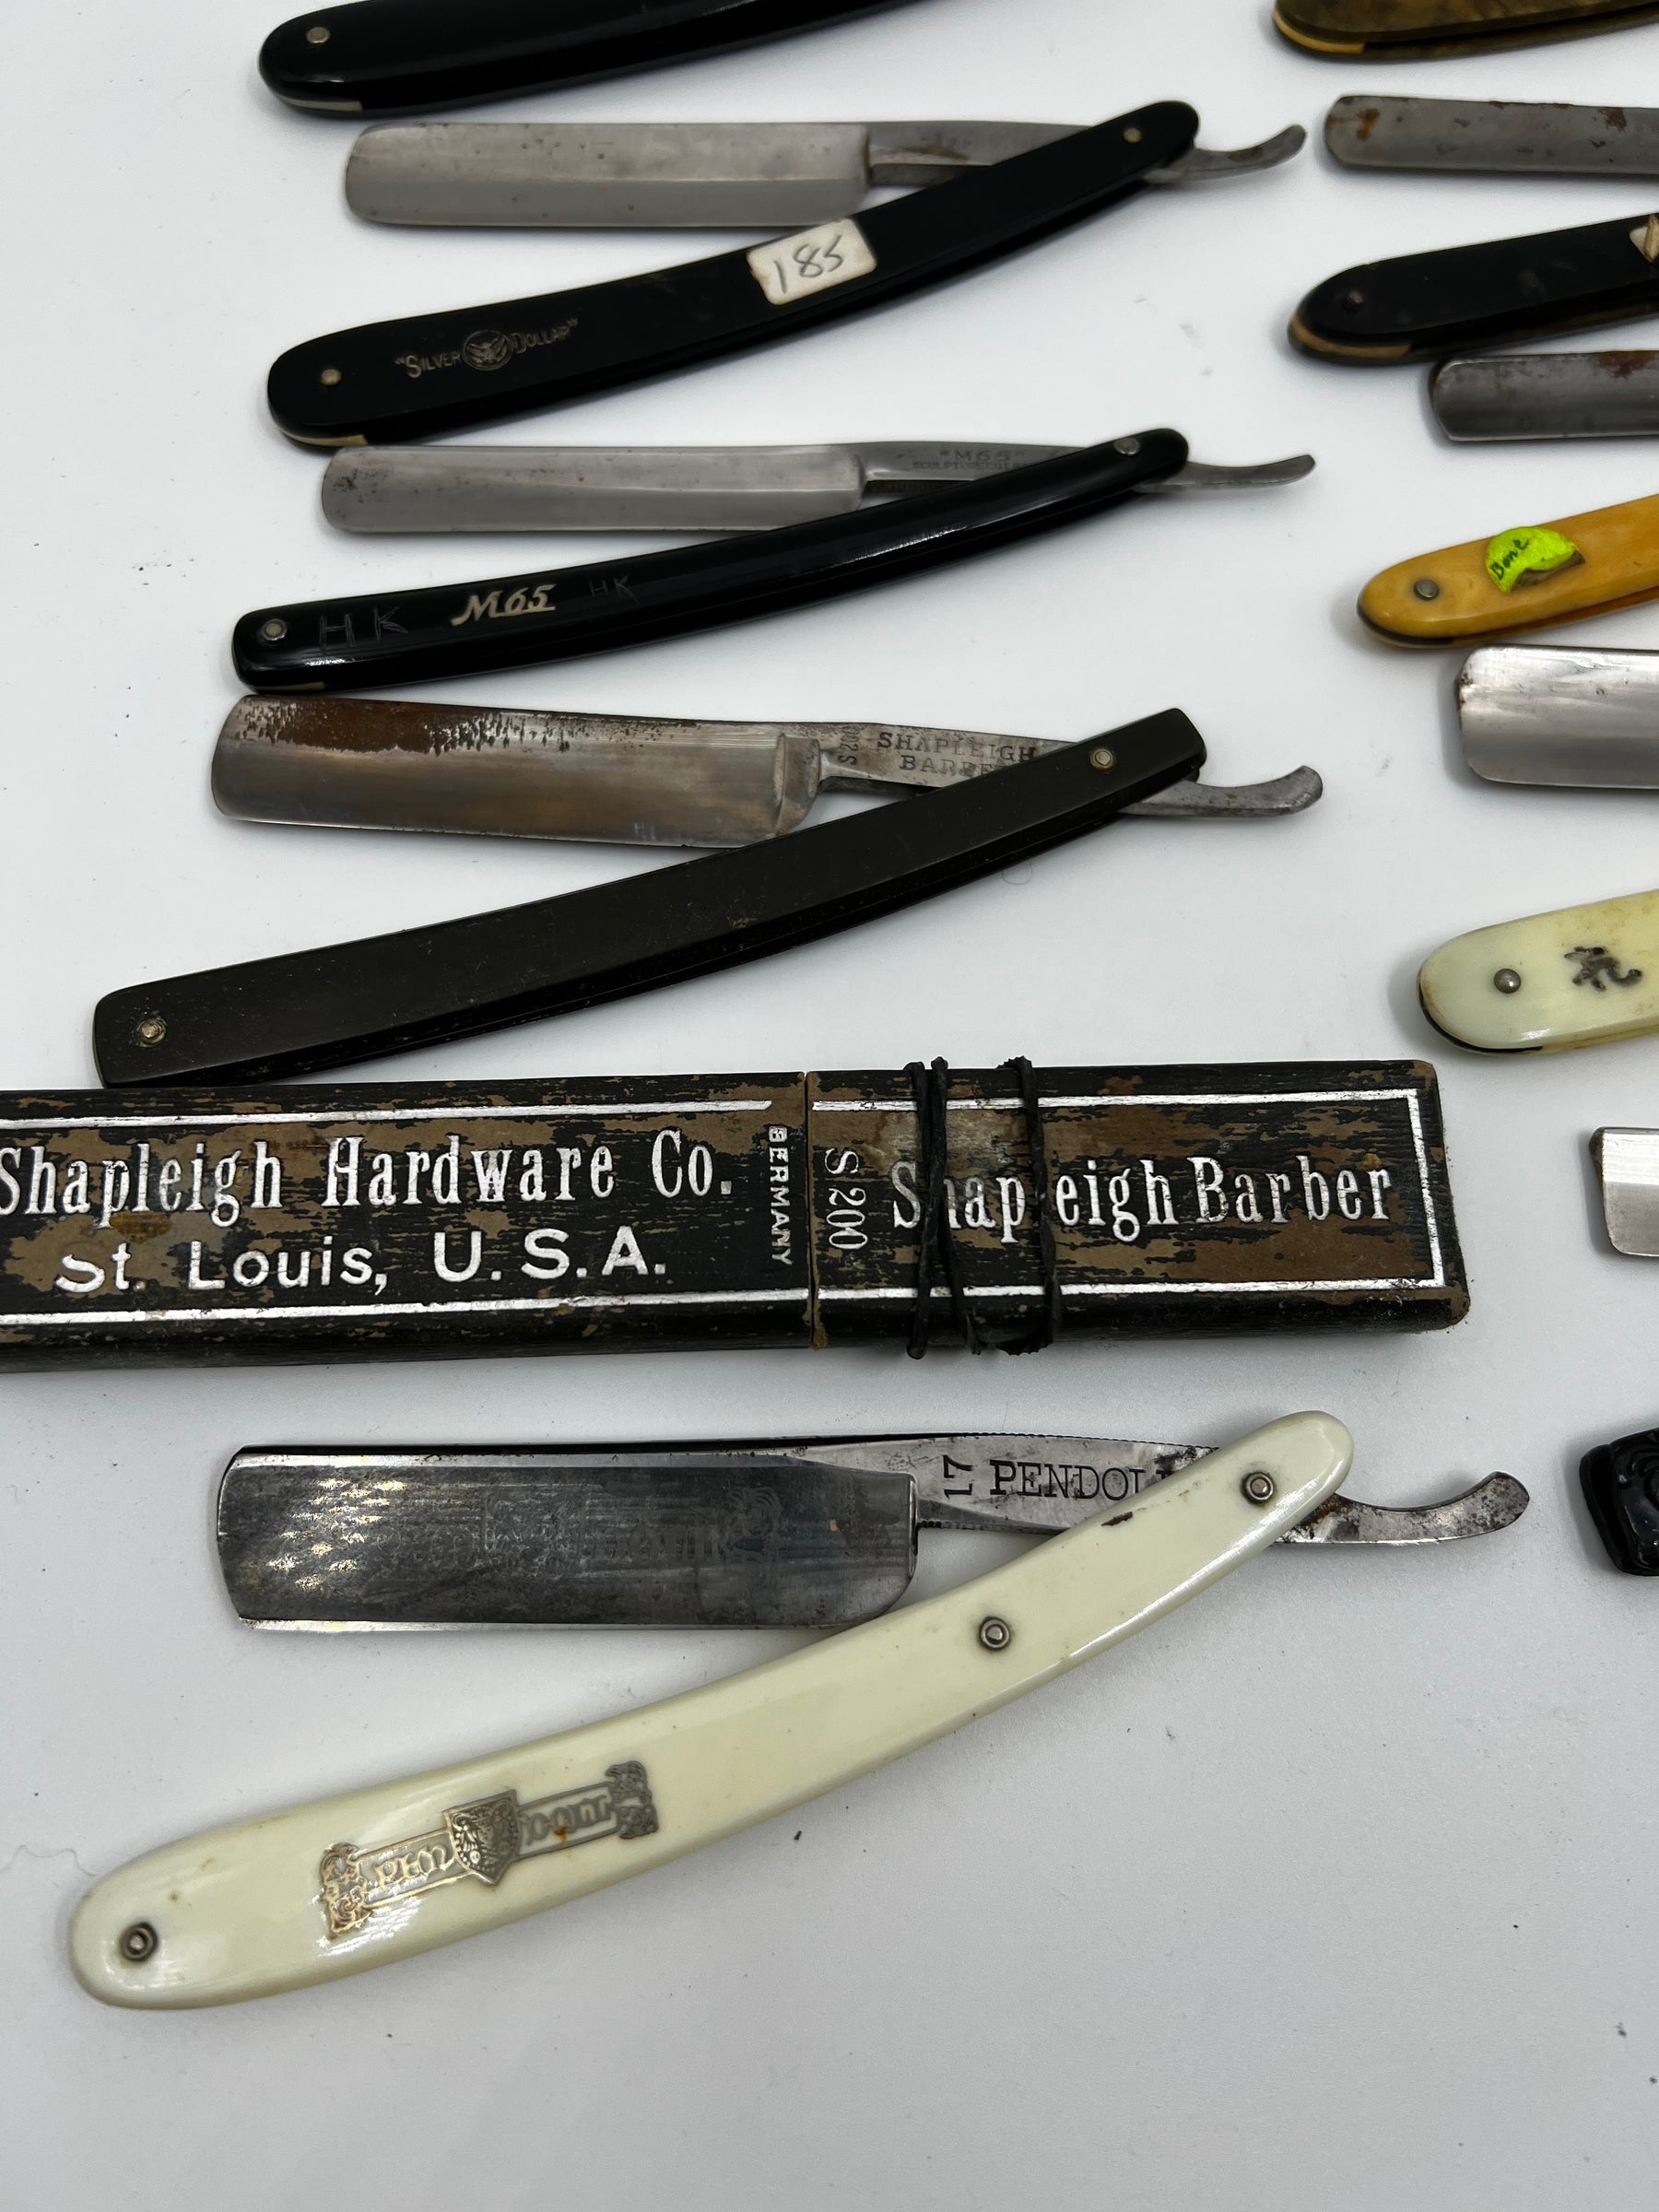 Vintage 10 Straight Razor Lot #19 - May Contain Sheffield, Solingen, Japanese & USA makers, as pictured